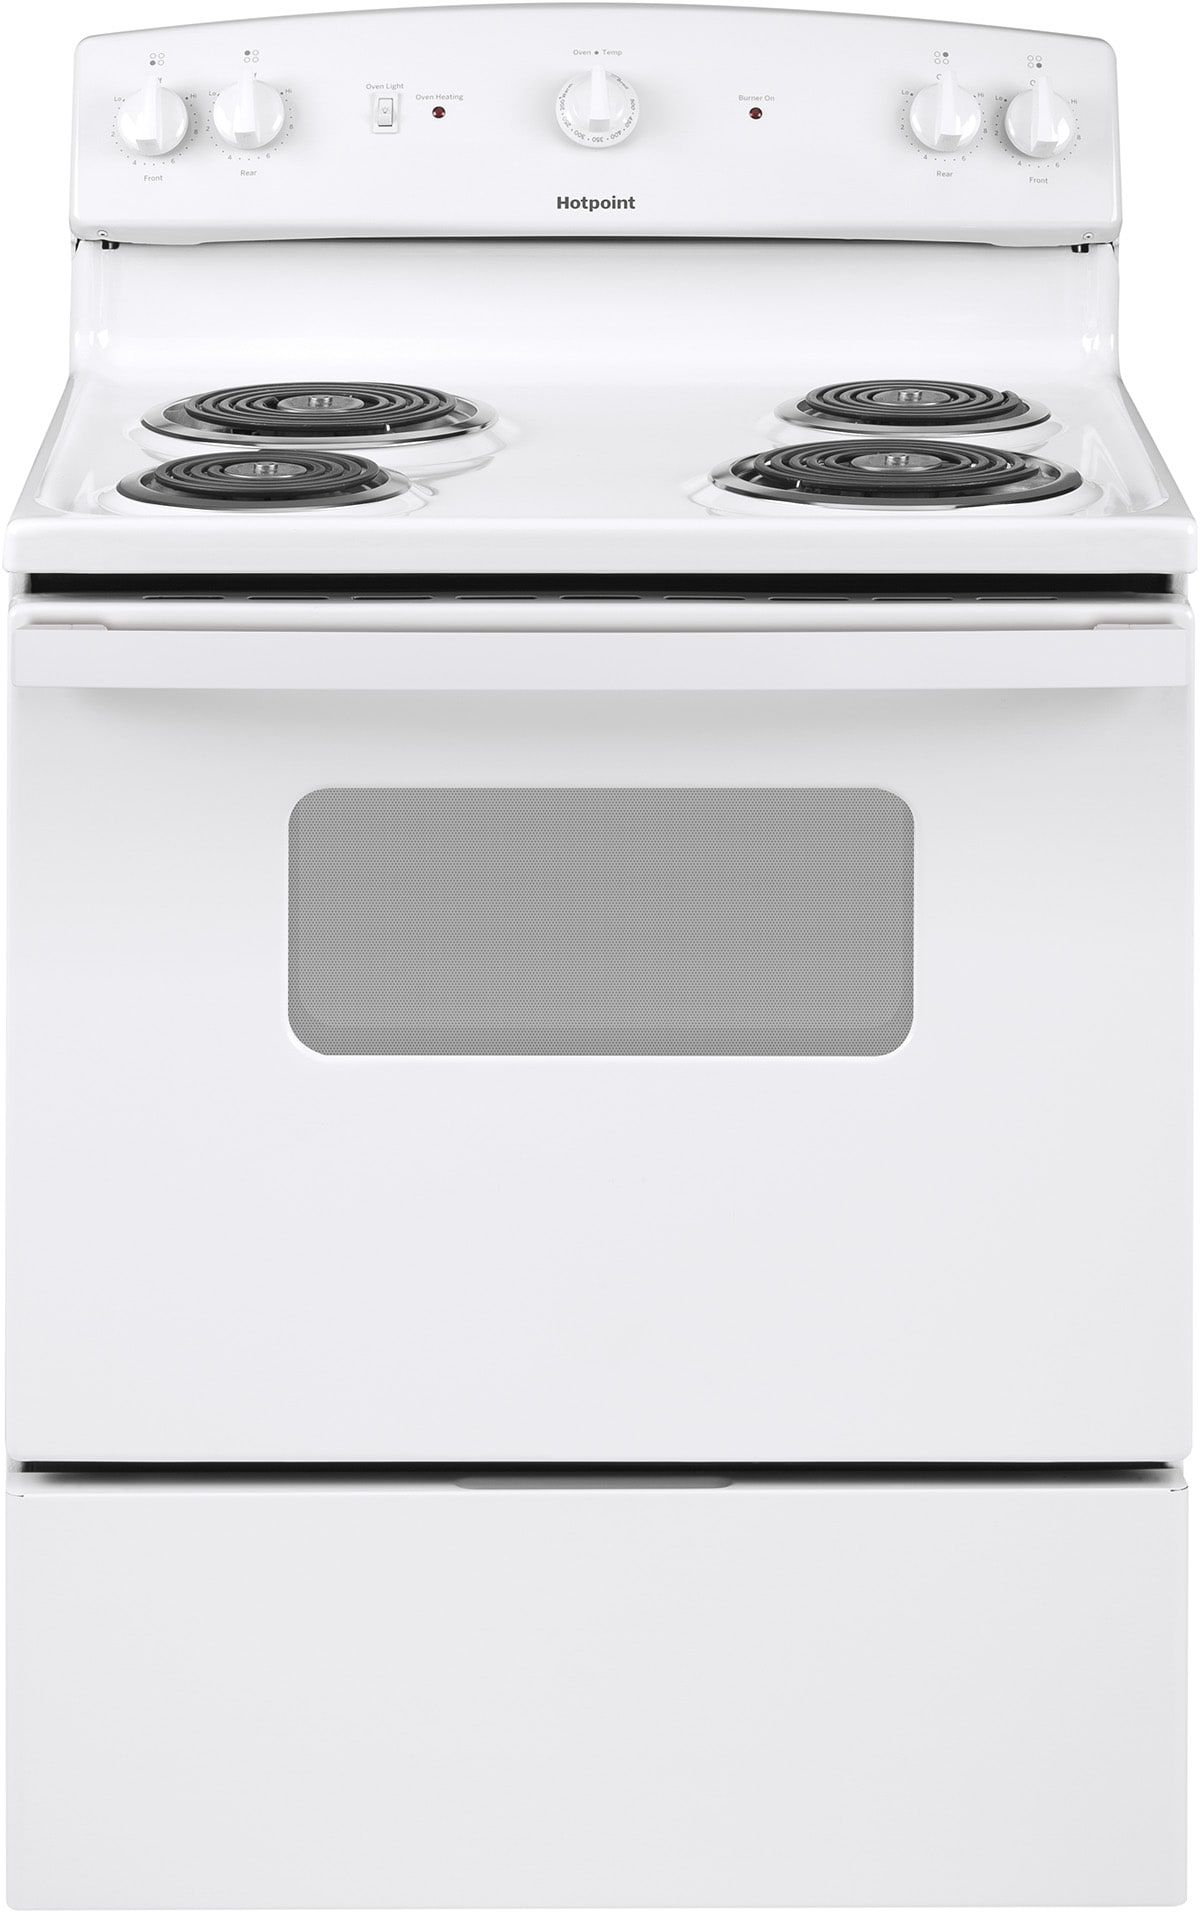 30-in 4 Elements 5-cu ft Freestanding Electric Range (White) | - Hotpoint RBS330DRWW